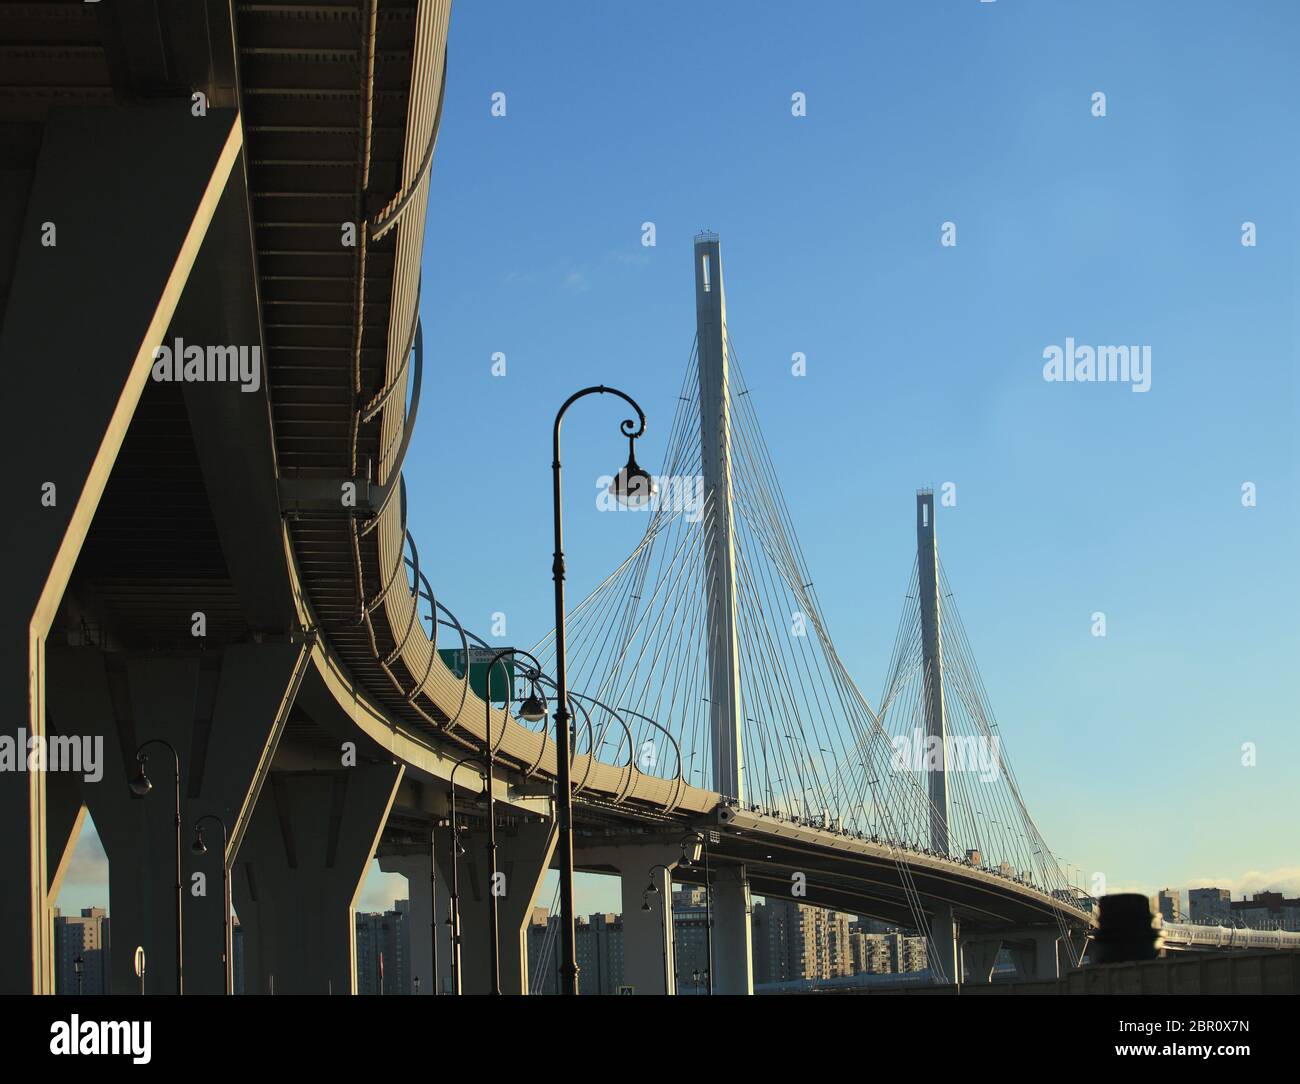 view of the overpass and cable-stayed bridge low angle view Stock Photo